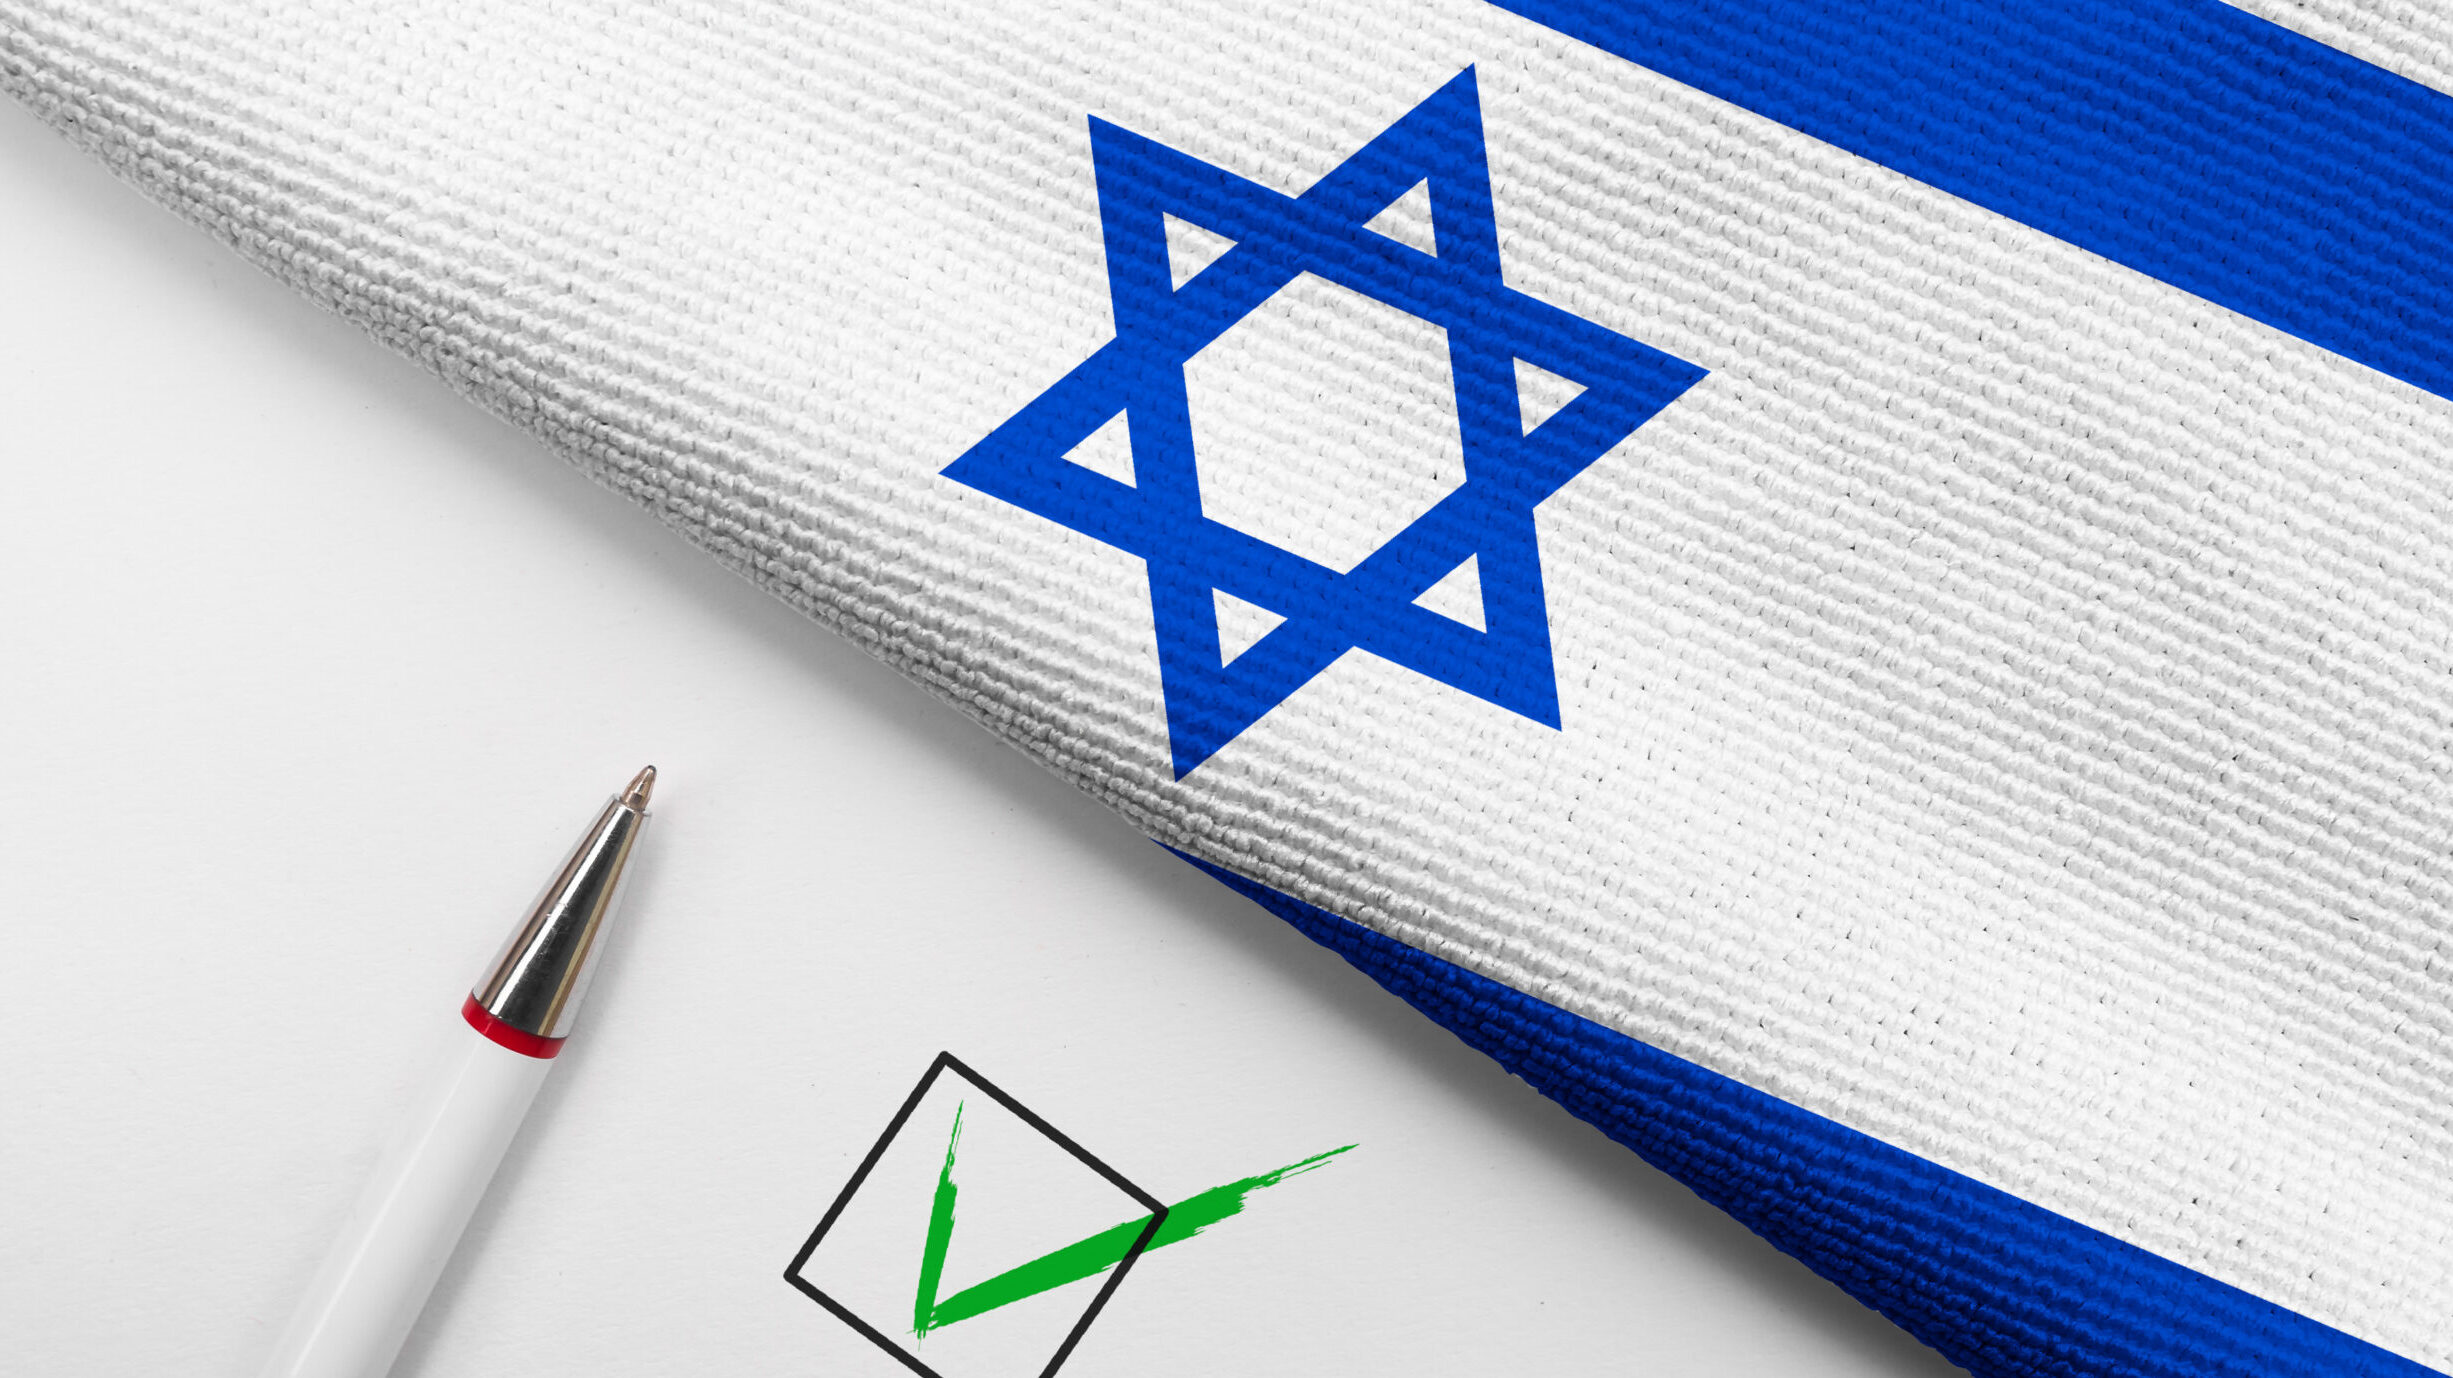 Recent IDI Poll: Israelis Largely Optimistic About Future, but Divides Between Jews and Arabs